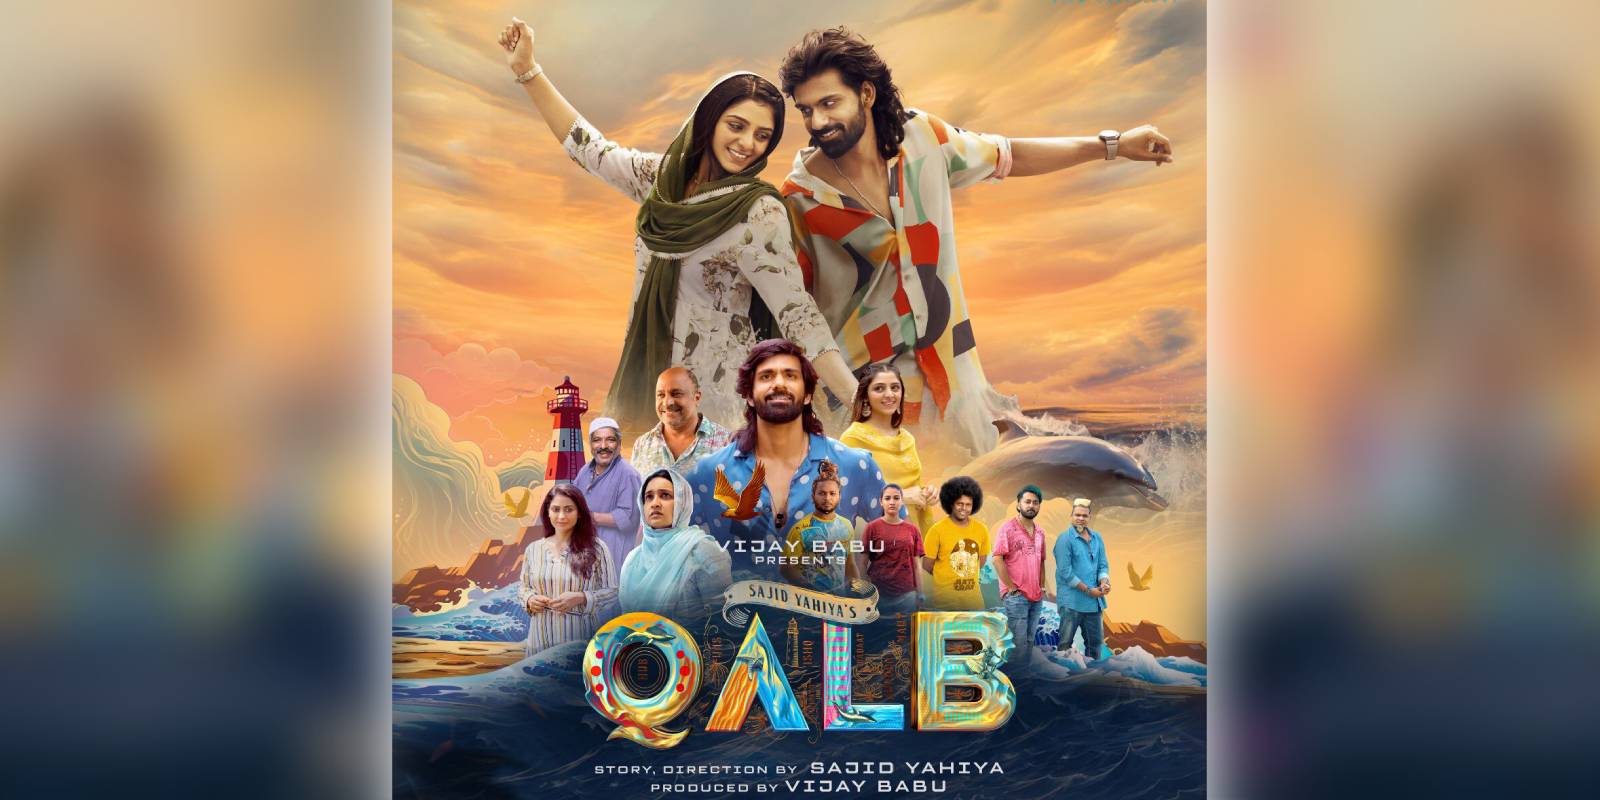 A poster of the film Qalb